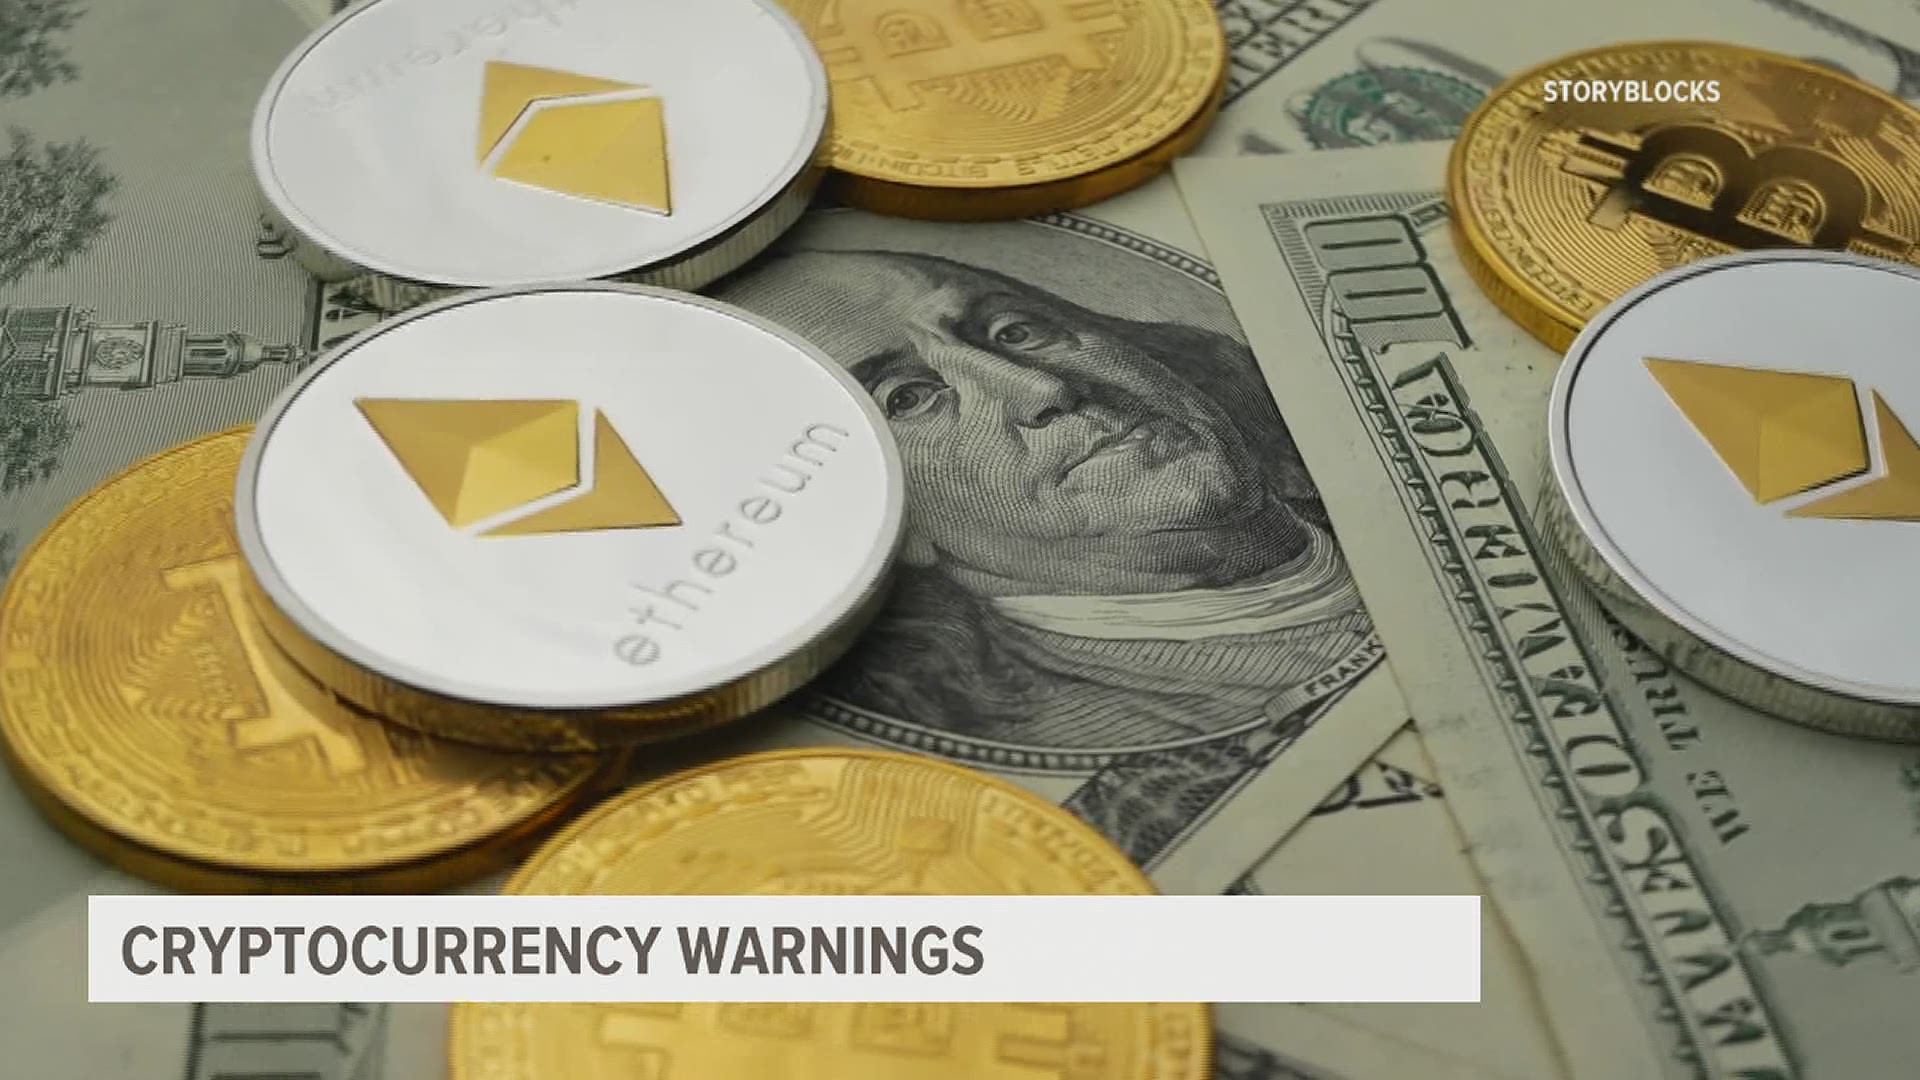 Check out FOX43's interview with James Ledbetter, editor and publisher of FIN, who has some warnings and advice about digital currency.